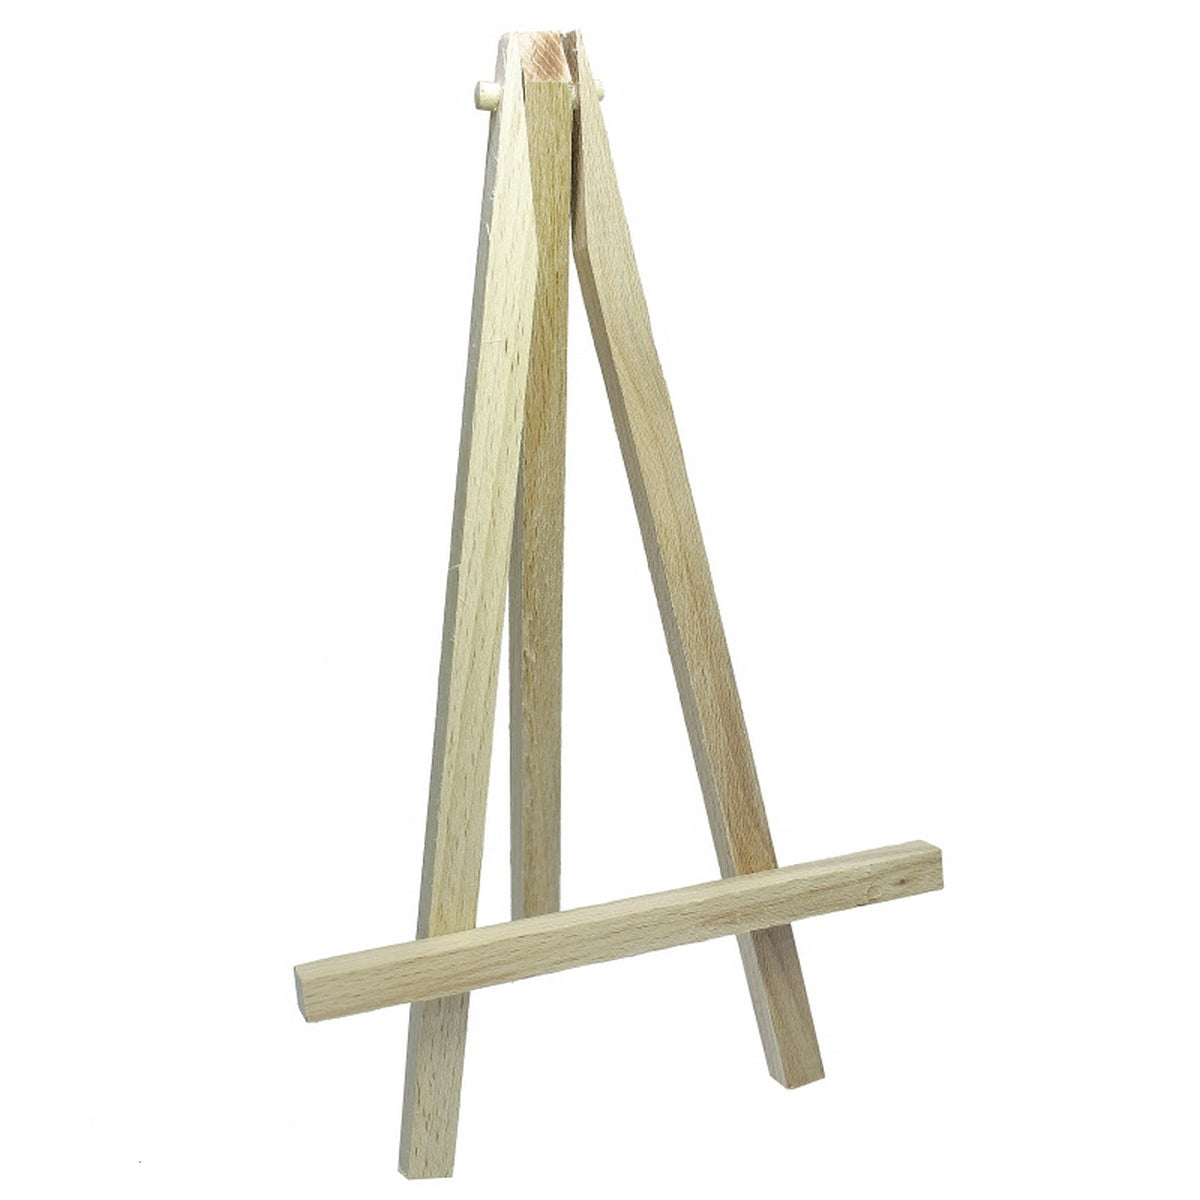 jags-mumbai Easel Wooden Easel / Wooden stand- 9.5"-10" approximately